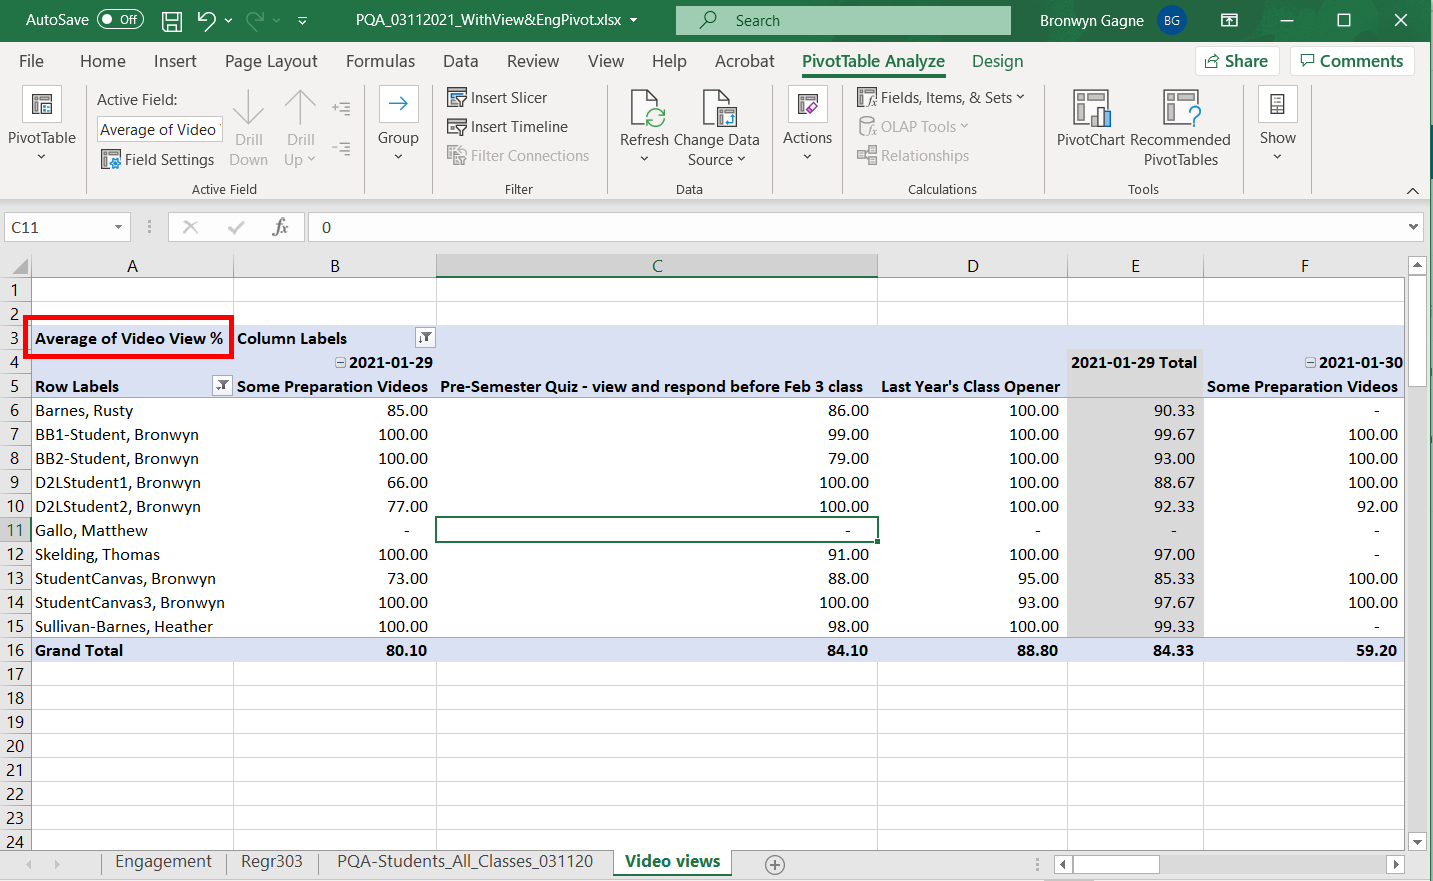 Pivot table with value field information identified in the table as described